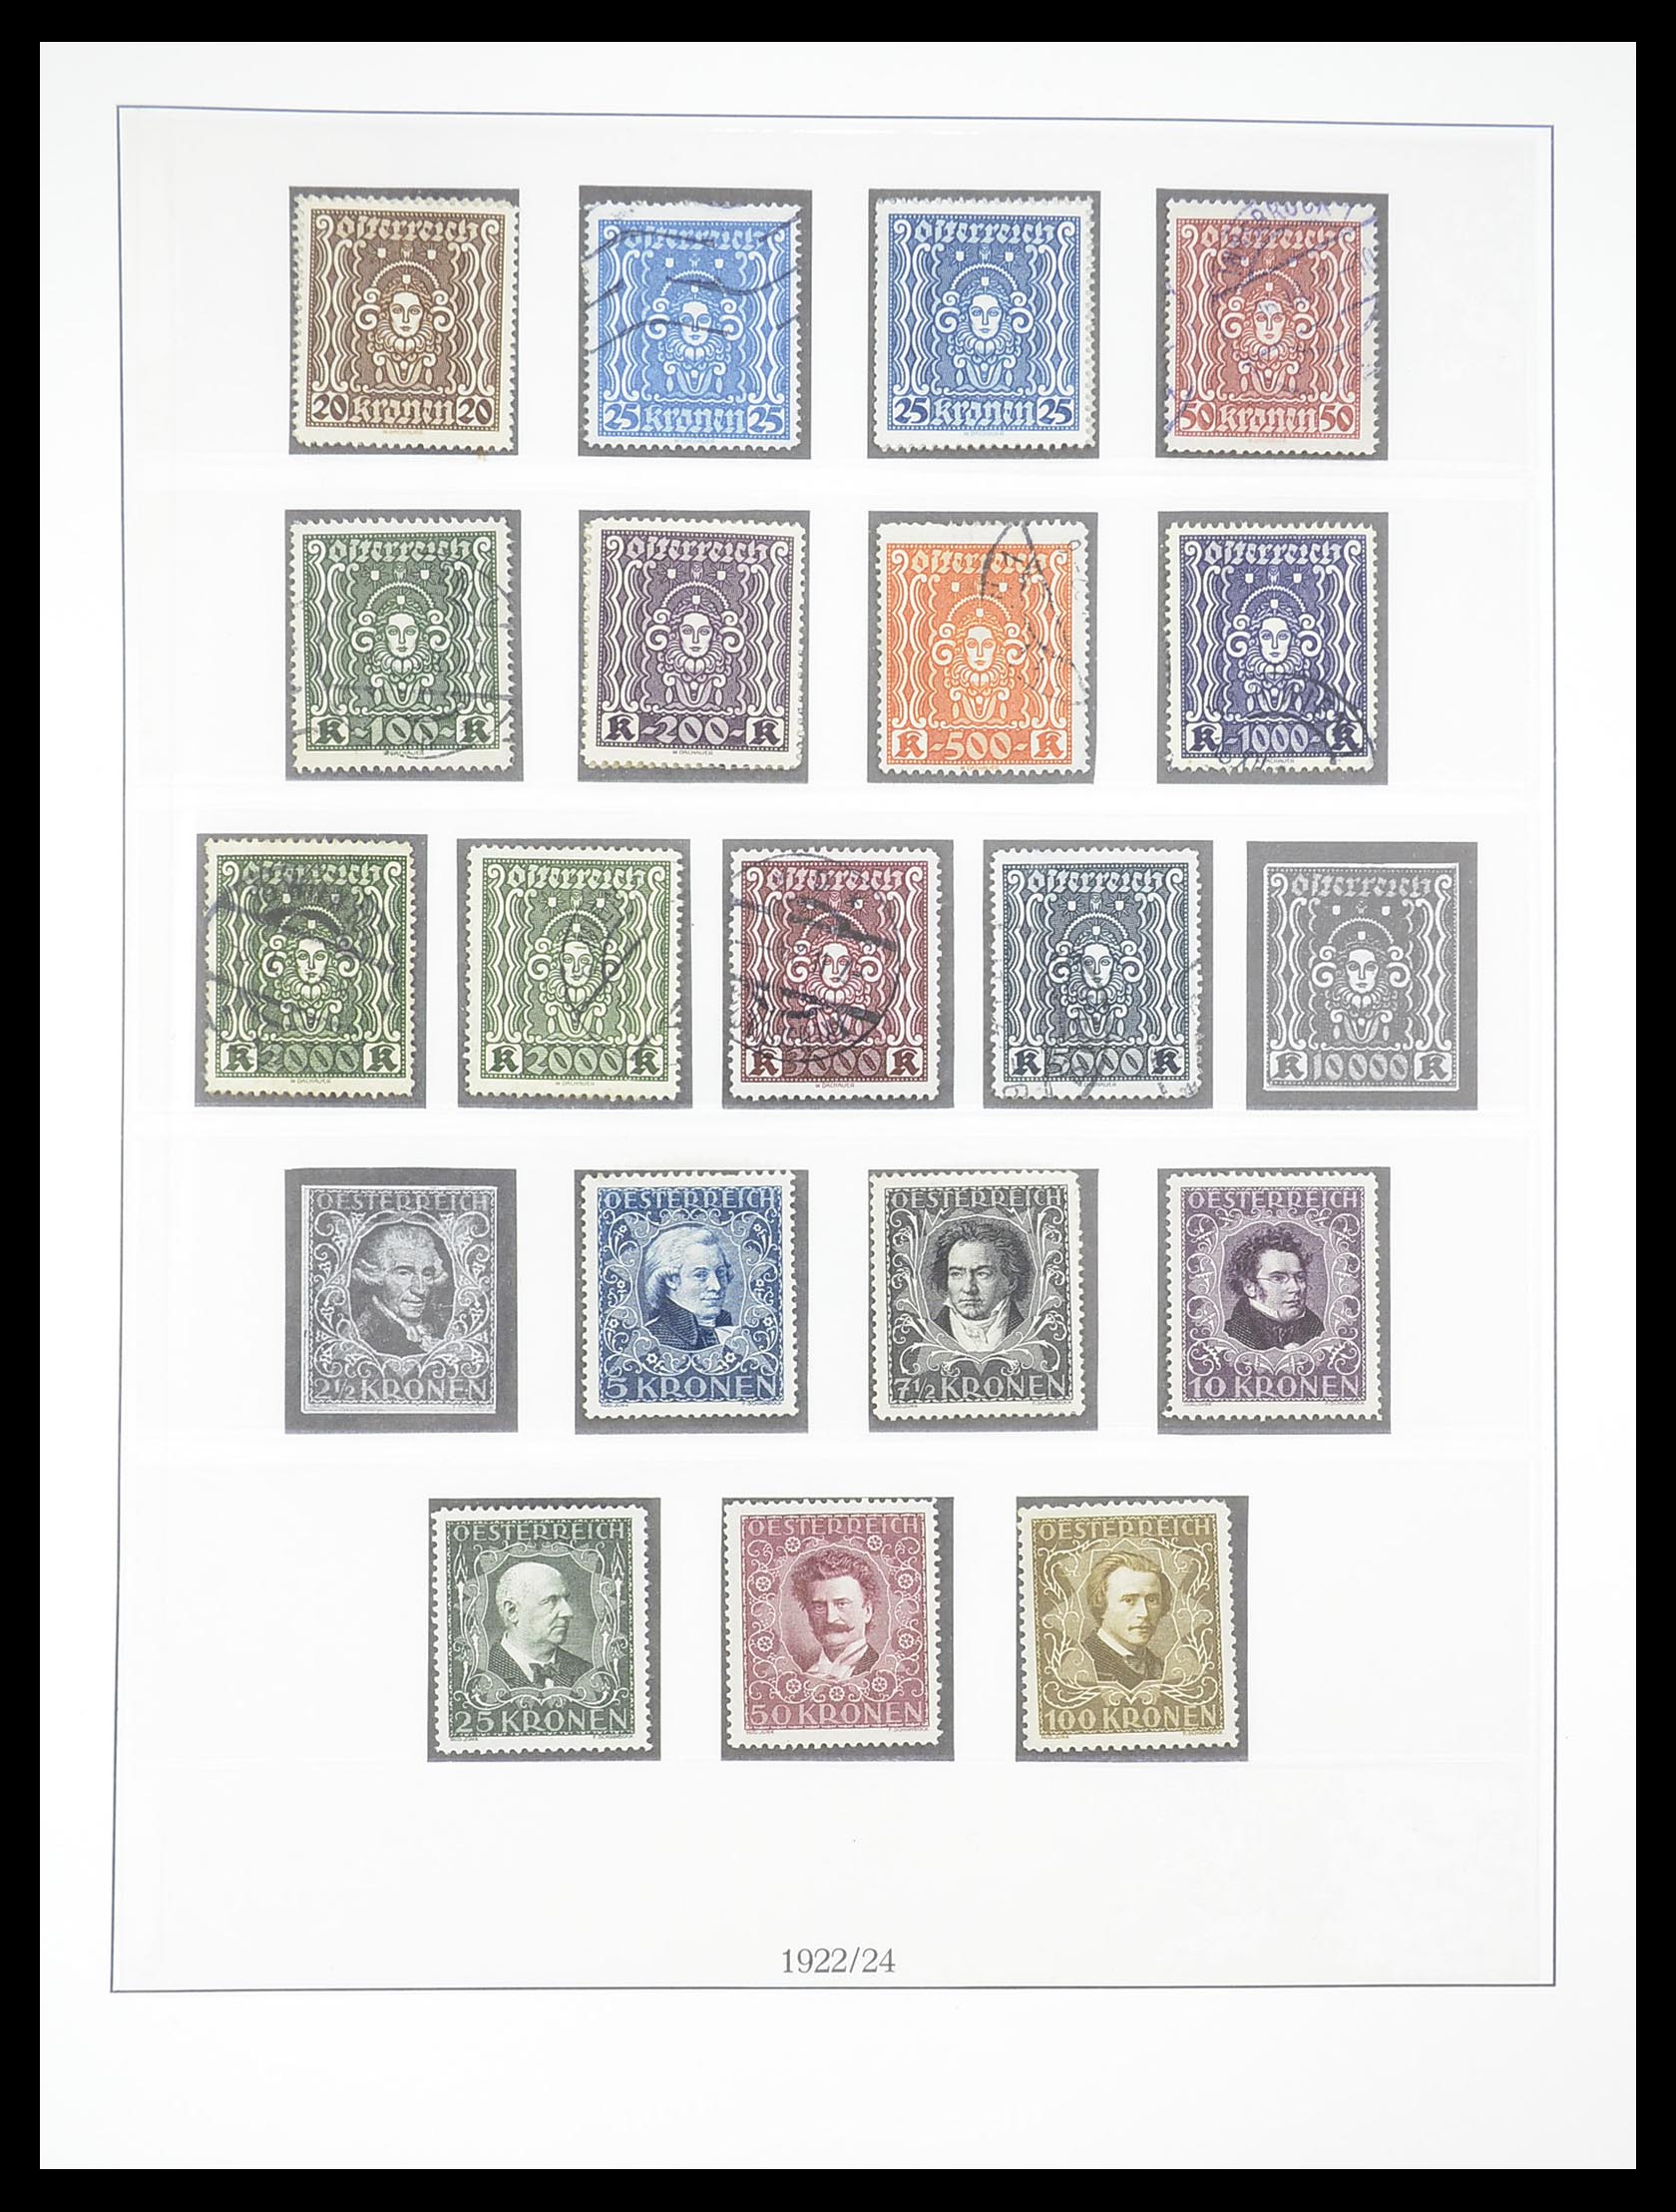 33189 072 - Stamp collection 33189 European countries 1850-1950.